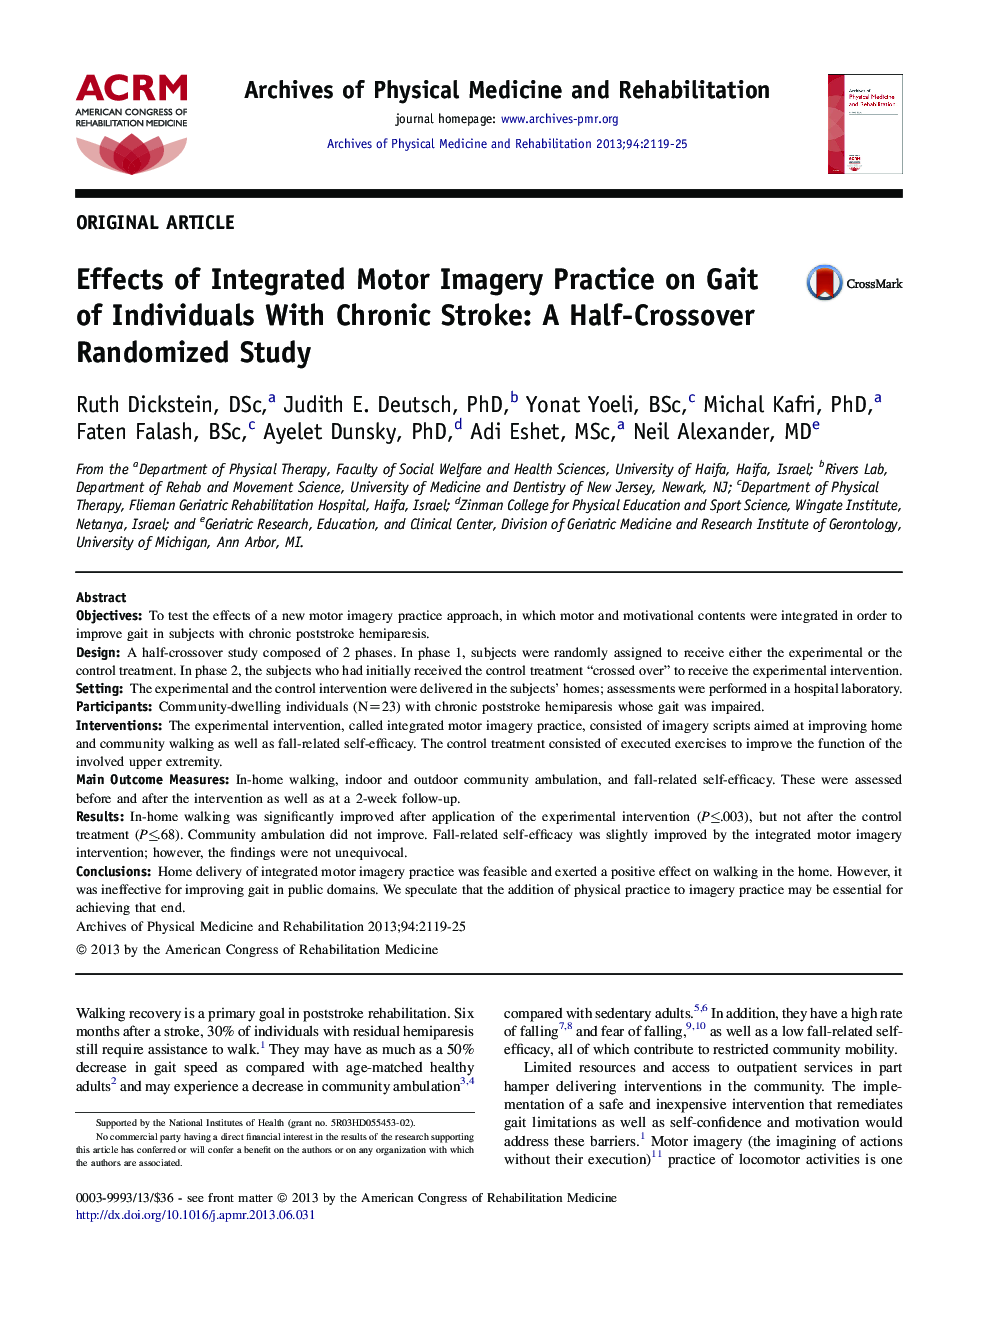 Effects of Integrated Motor Imagery Practice on Gait of Individuals With Chronic Stroke: A Half-Crossover Randomized Study 